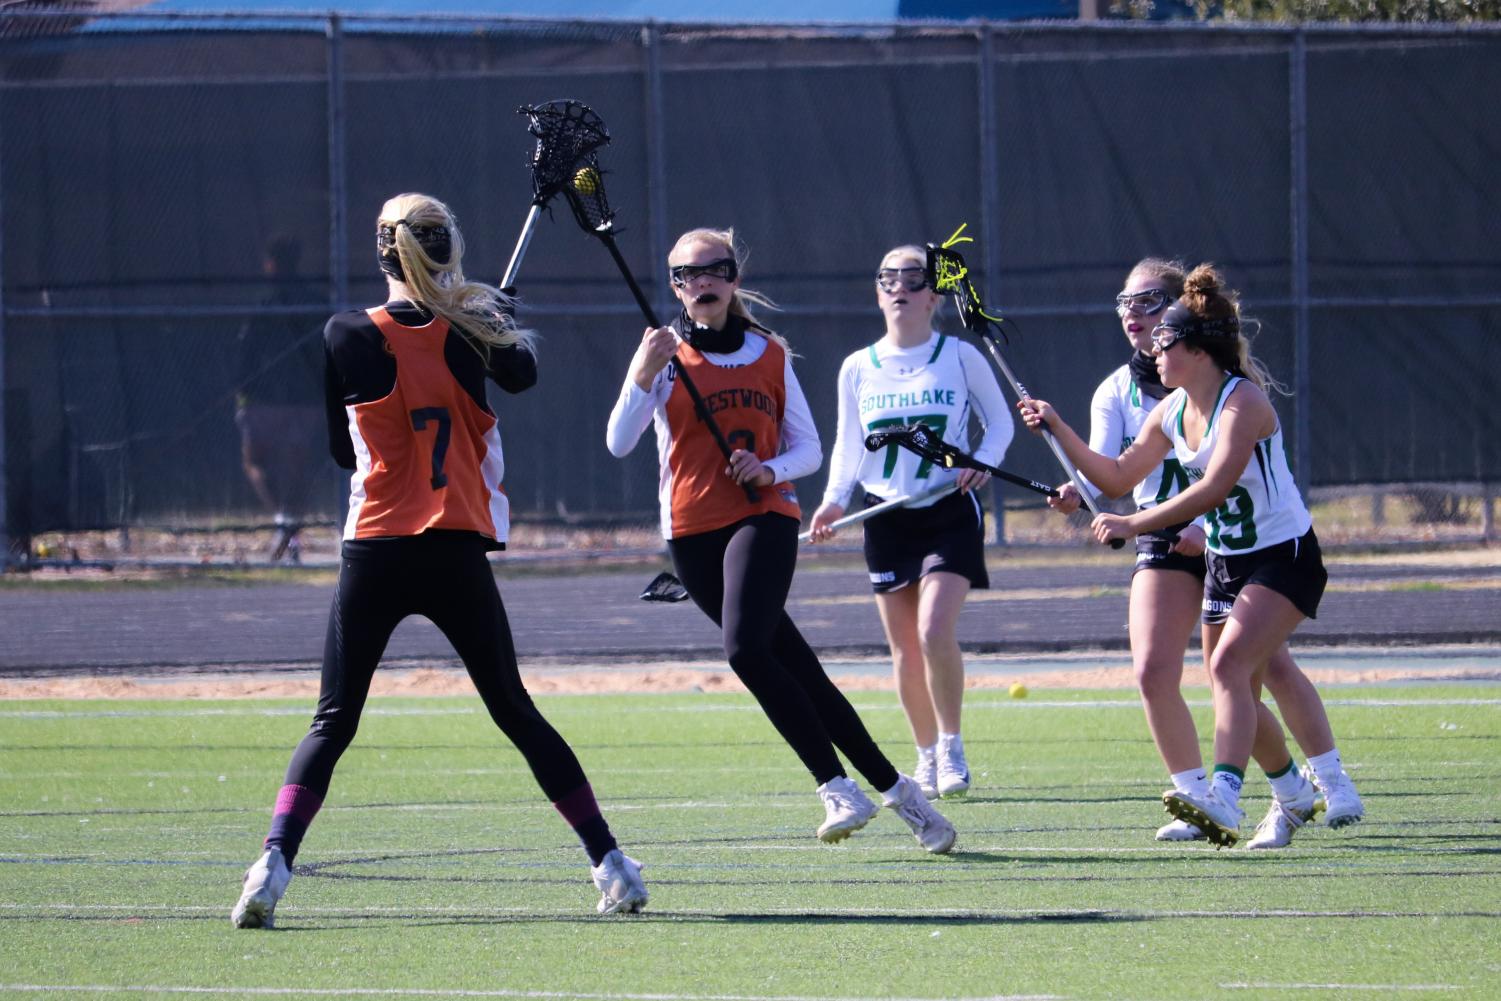 GALLERY%3A+Varsity+Womens+Lacrosse+Competes+in+Tournament+vs.+Southlake+and+Prosper